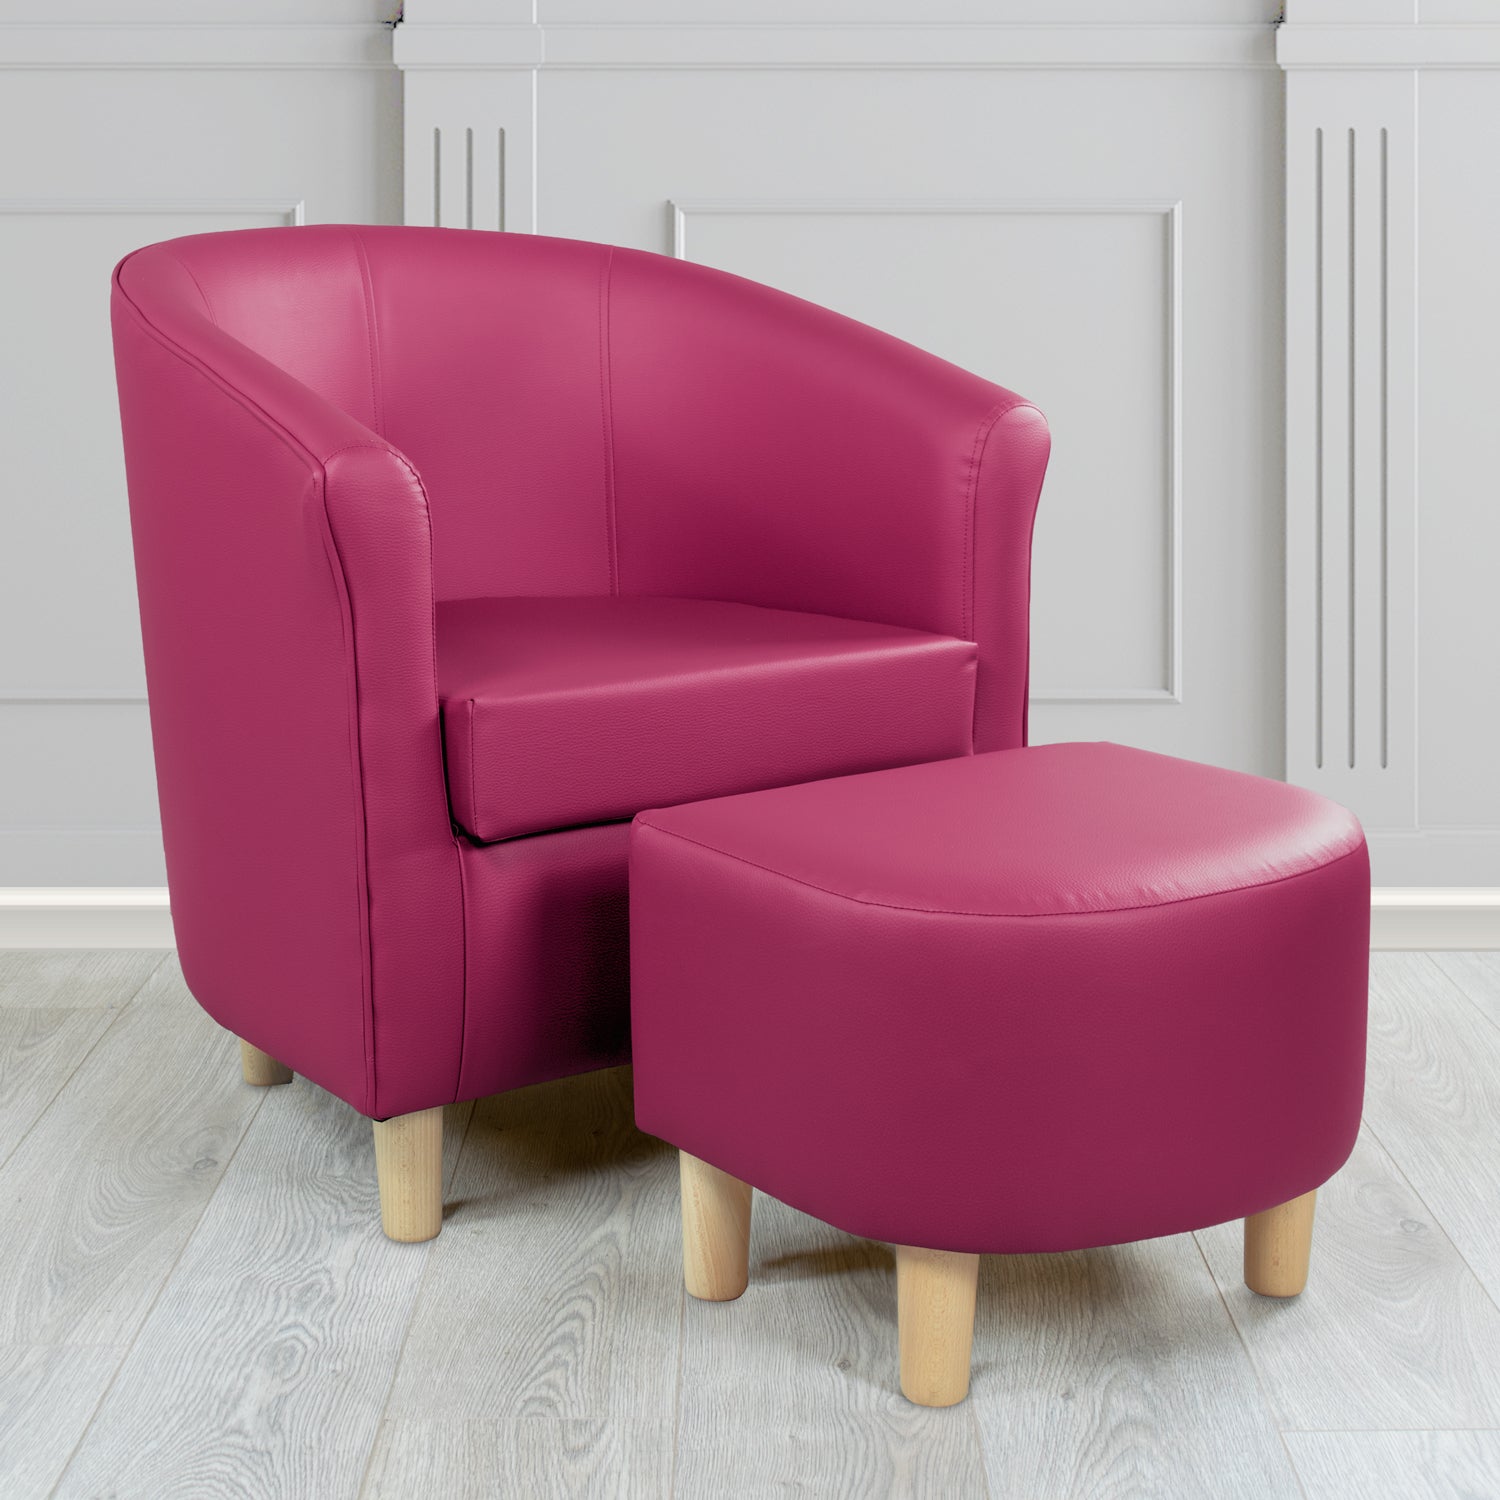 Tuscany Just Colour Raspberry Crush Faux Leather Tub Chair with Footstool Set - The Tub Chair Shop